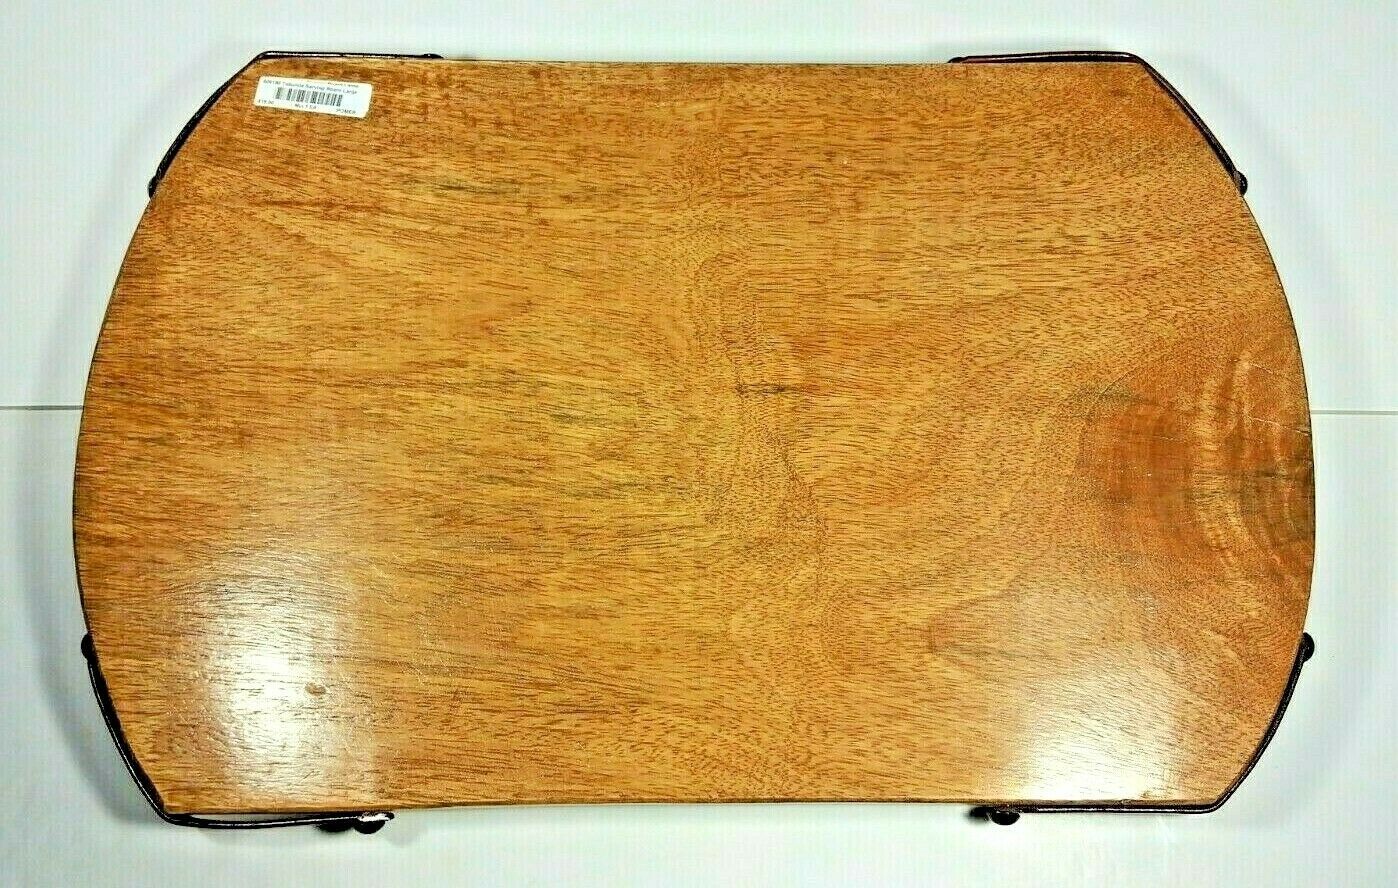 Primary image for Pomeroy Telluride Large Wood Serving Board 609190 Cutting Board